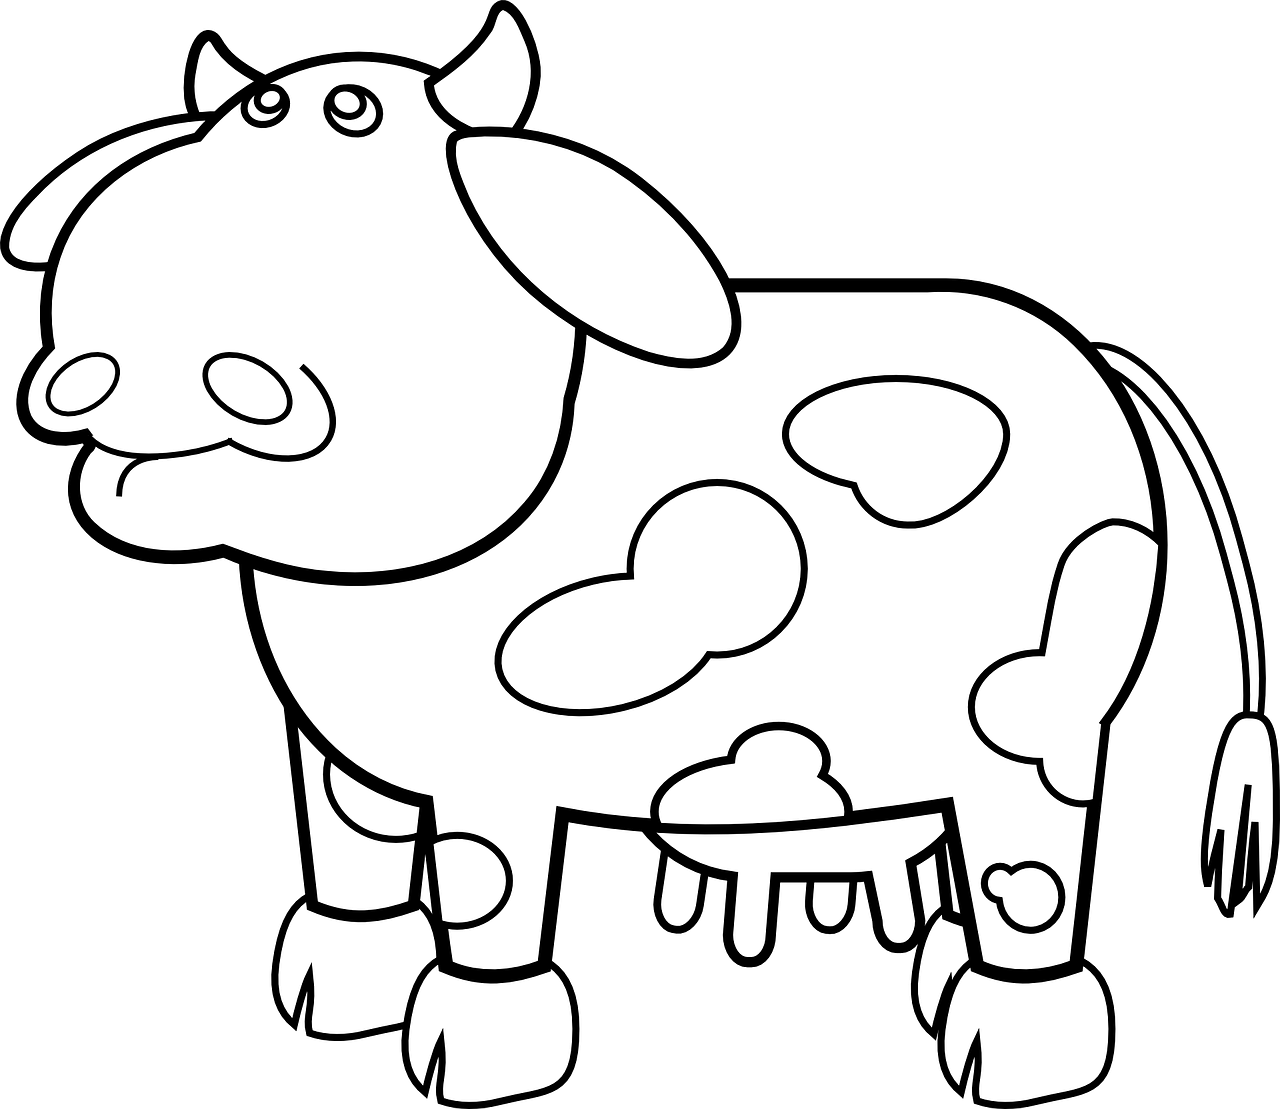 a black and white drawing of a cow, a cartoon, by Matt Stewart, pixabay, mingei, detailed white liquid, coloring book page, outline glow, ( 3 1